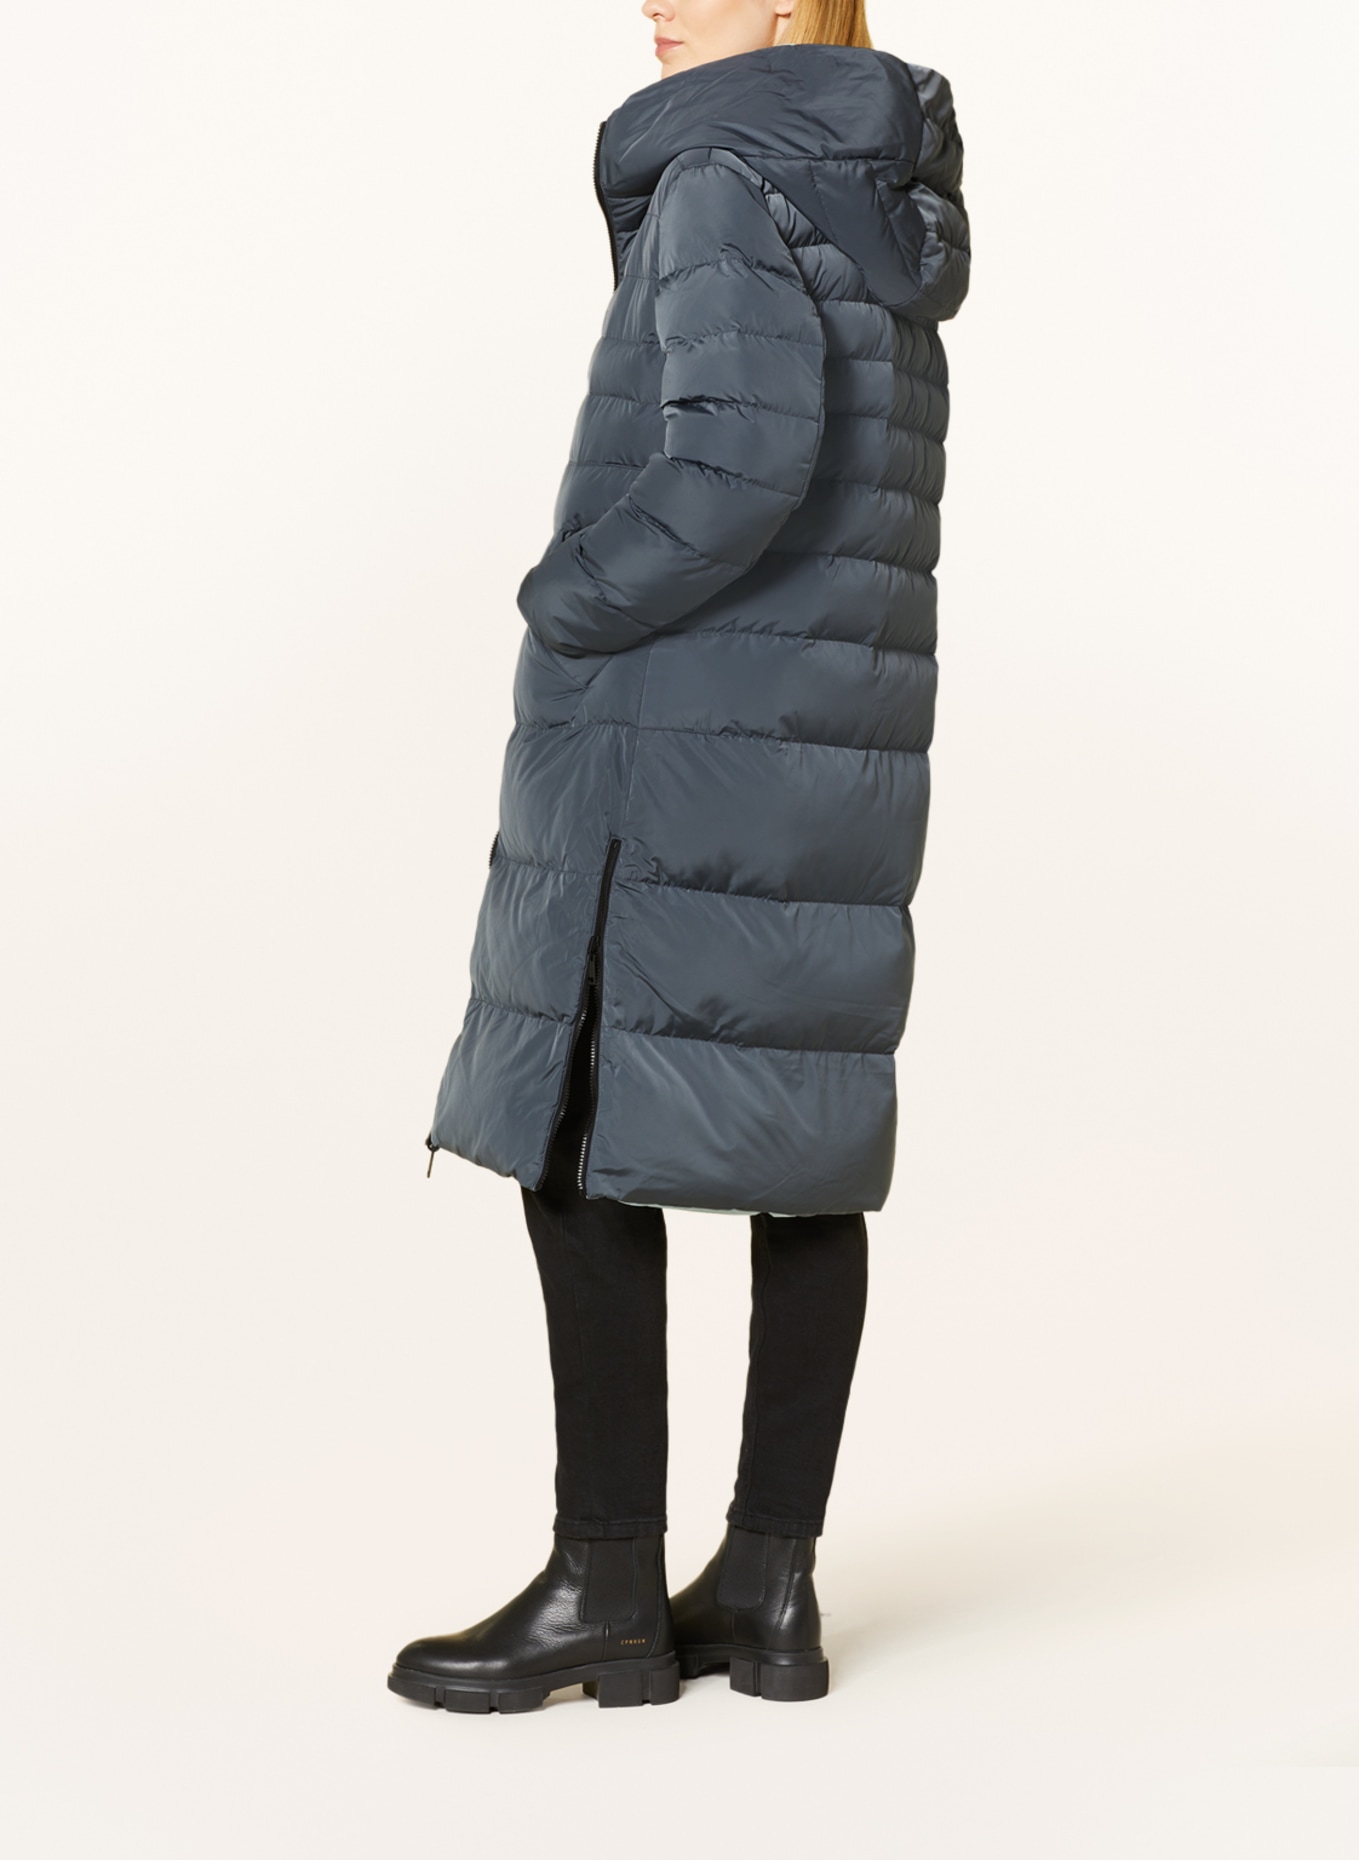 RINO & PELLE Quilted coat KEILA reversible, Color: BLUE GRAY (Image 5)